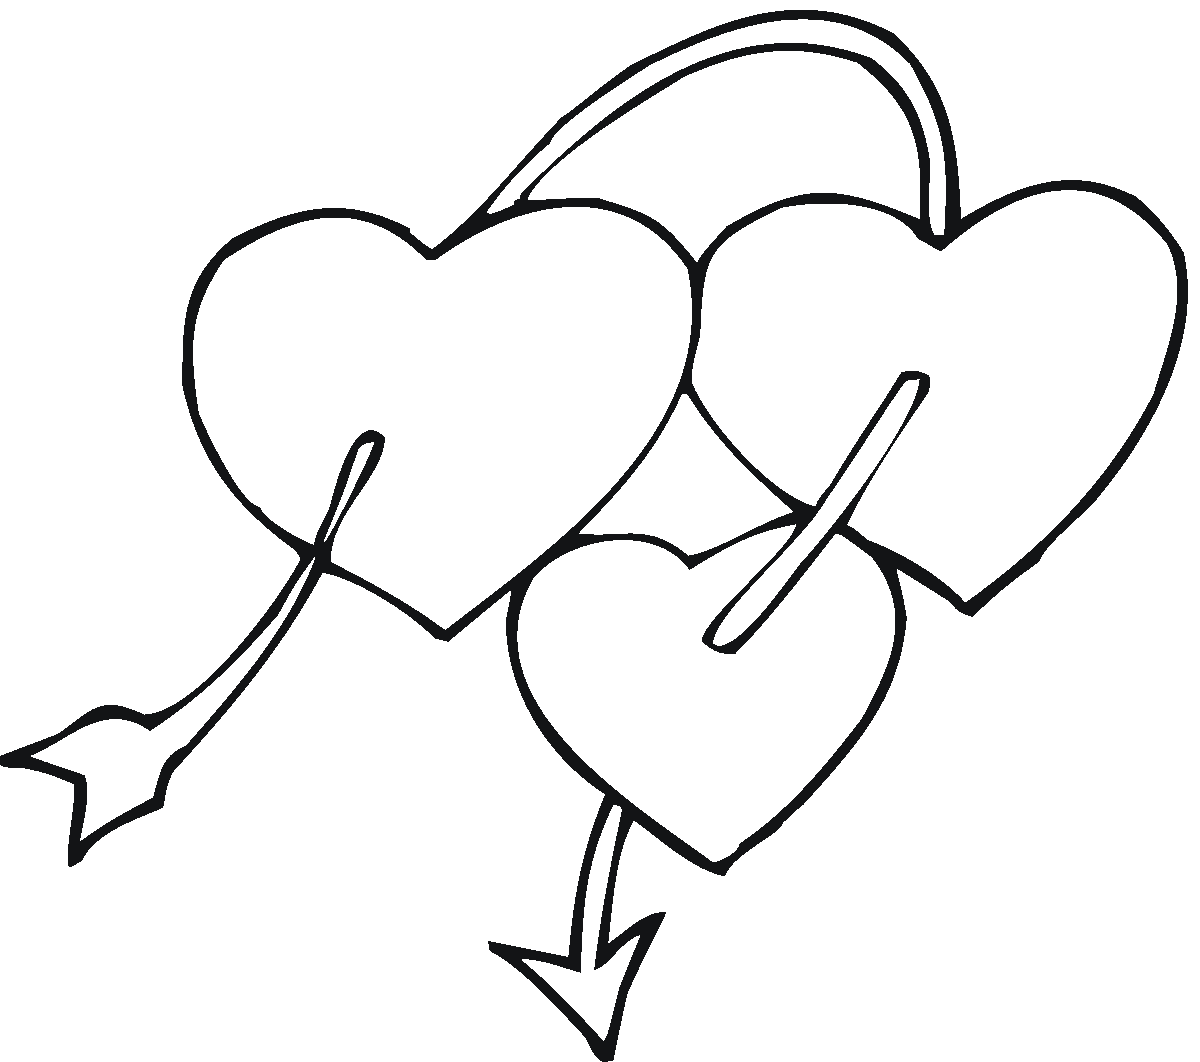 Heart drawing  How to draw a heart  Easy drawings easy